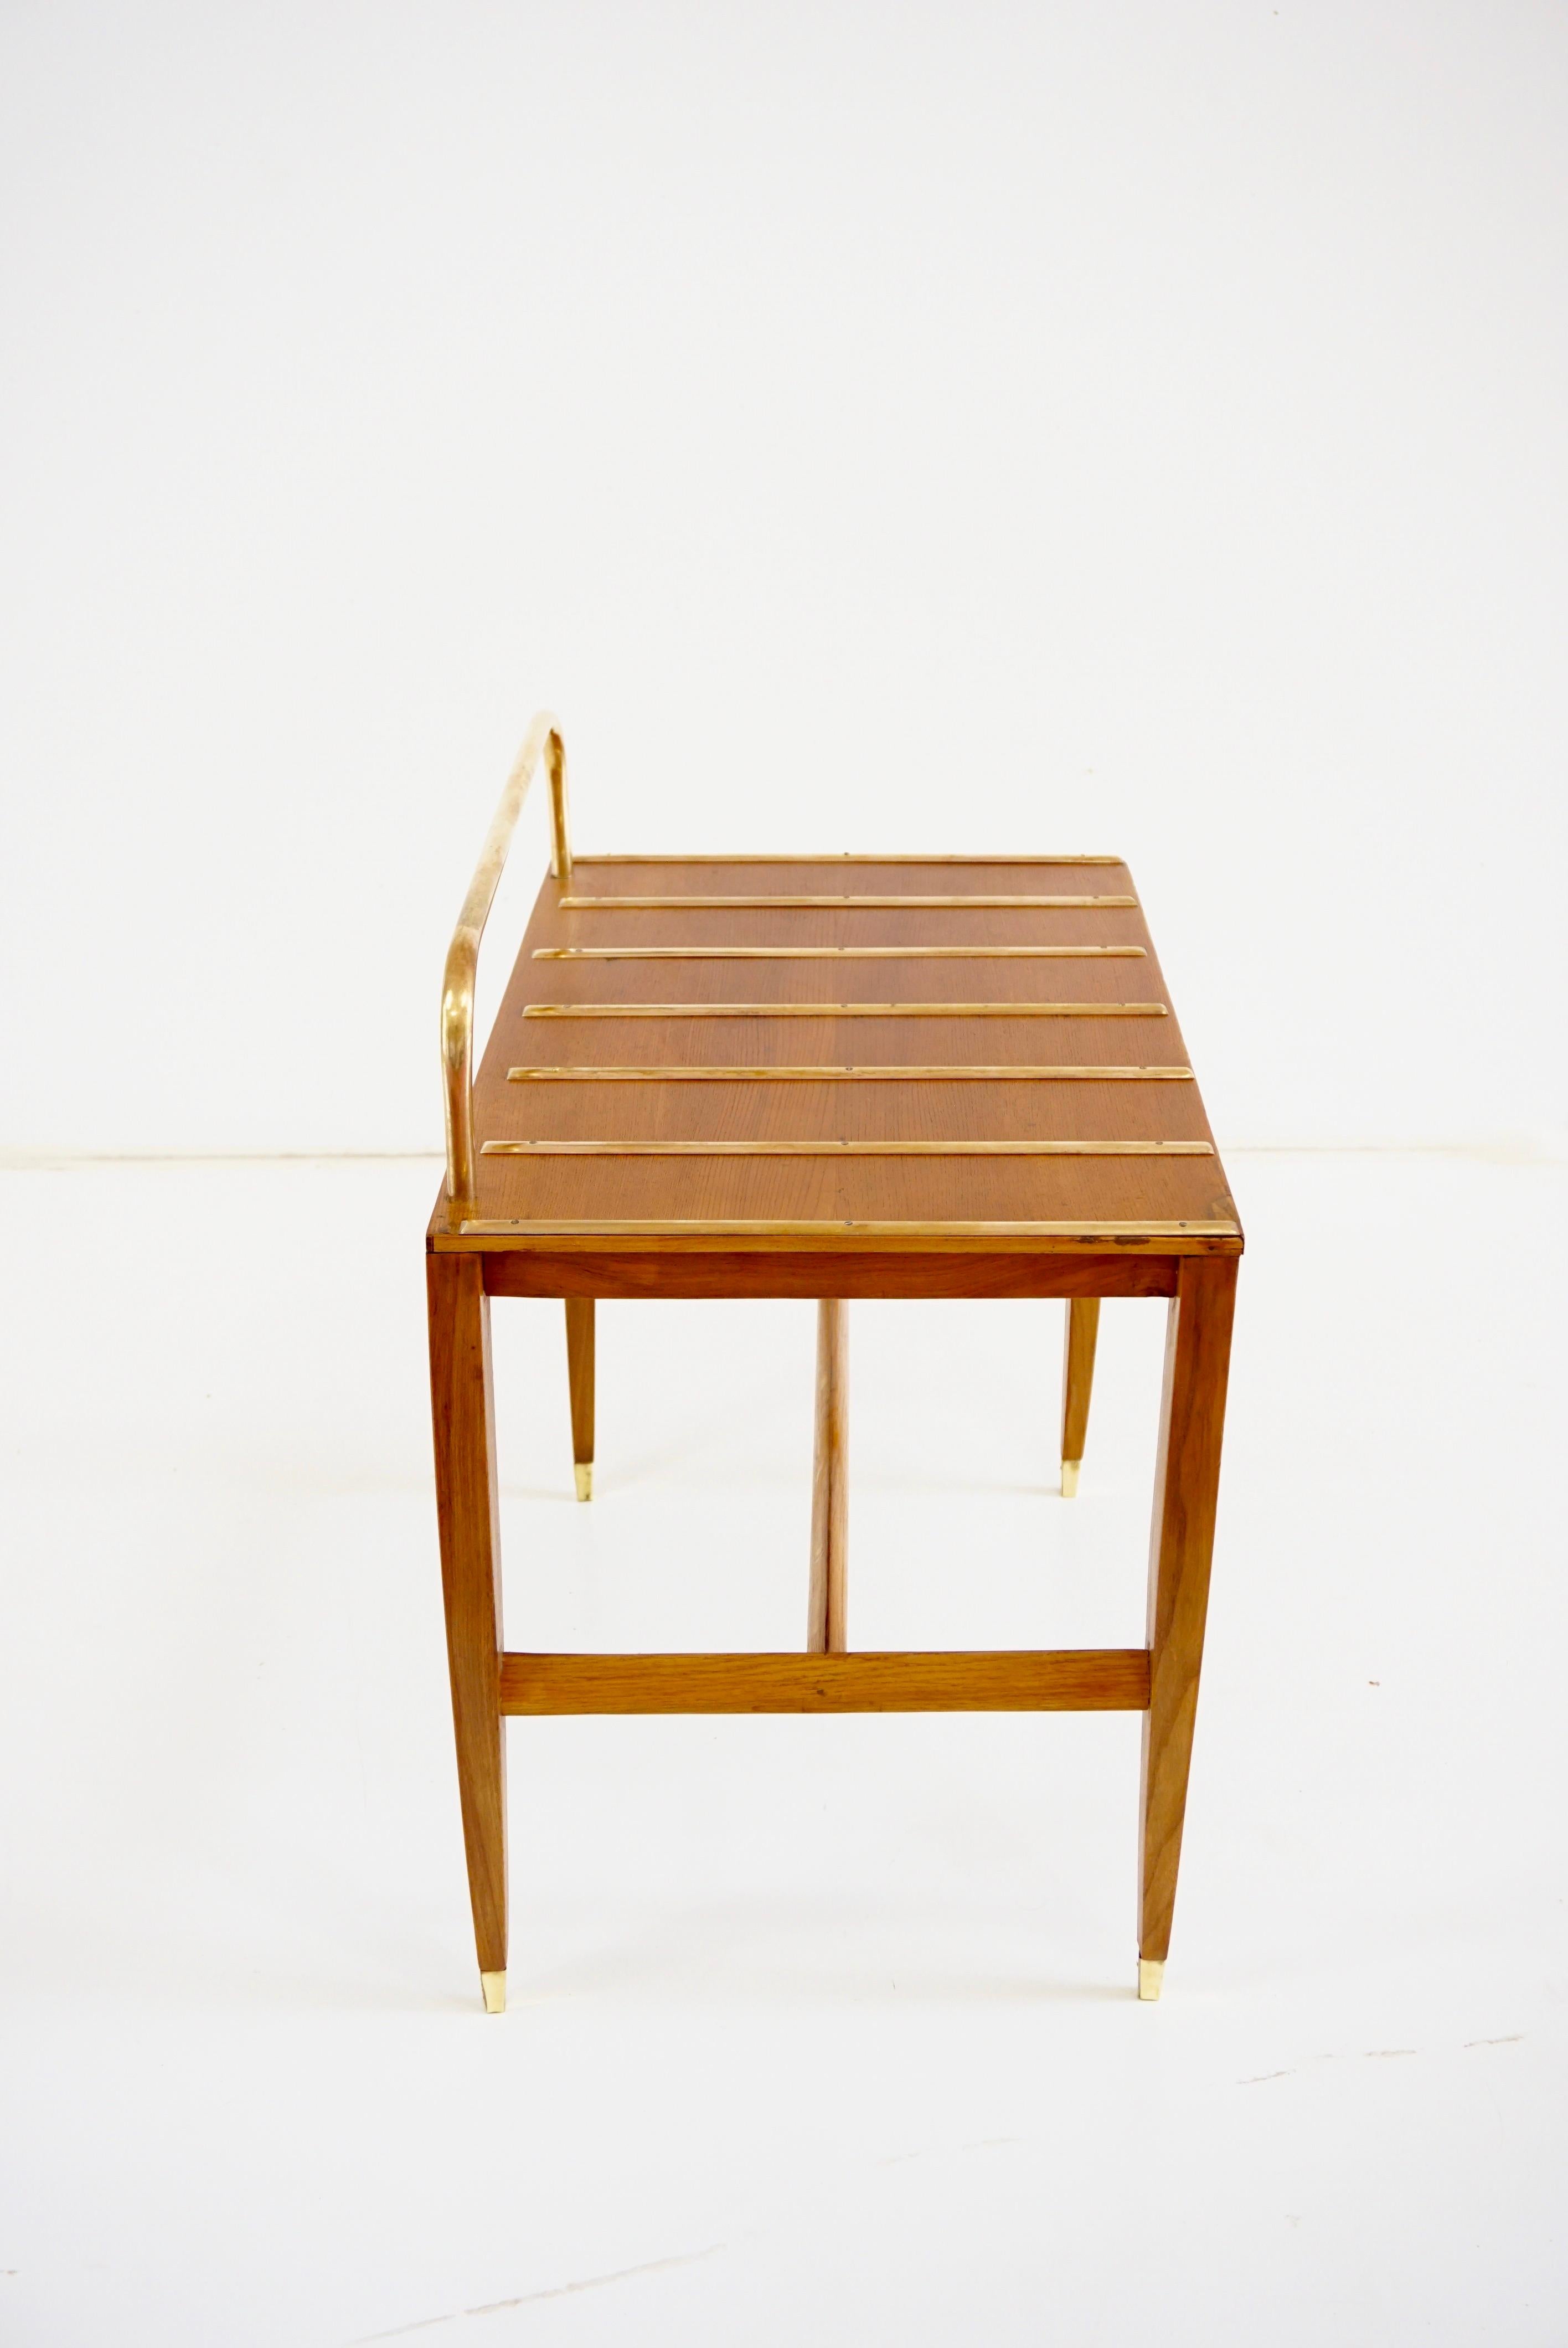 Gio Ponti Walnut Side Table, Luggage Rack for Hotel Royal Naples, 1955 For Sale 1